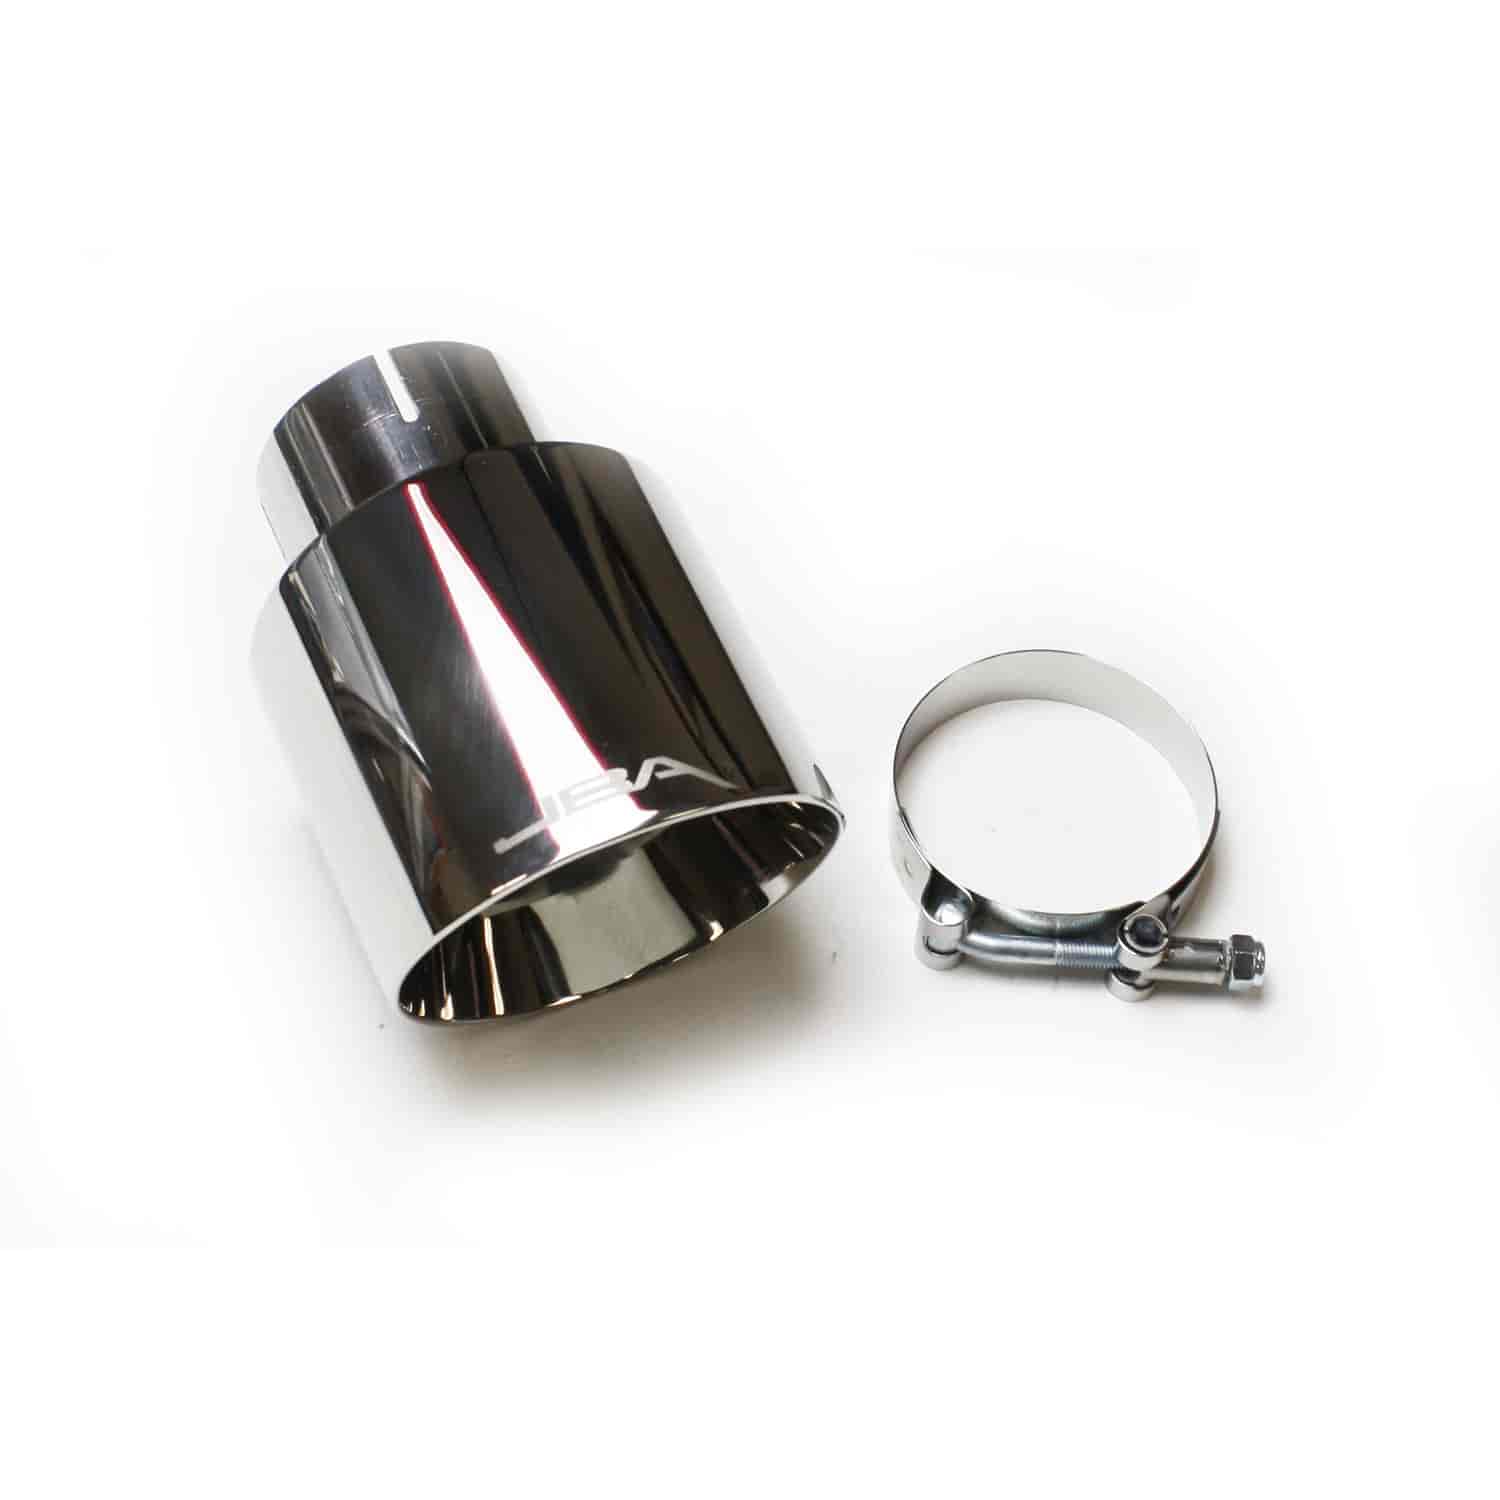 JBA Performance Exhaust 12-8257 2.5? x 4? x 5 3/4"? Double Wall Polished S/S Chrome Tip - Clamp on